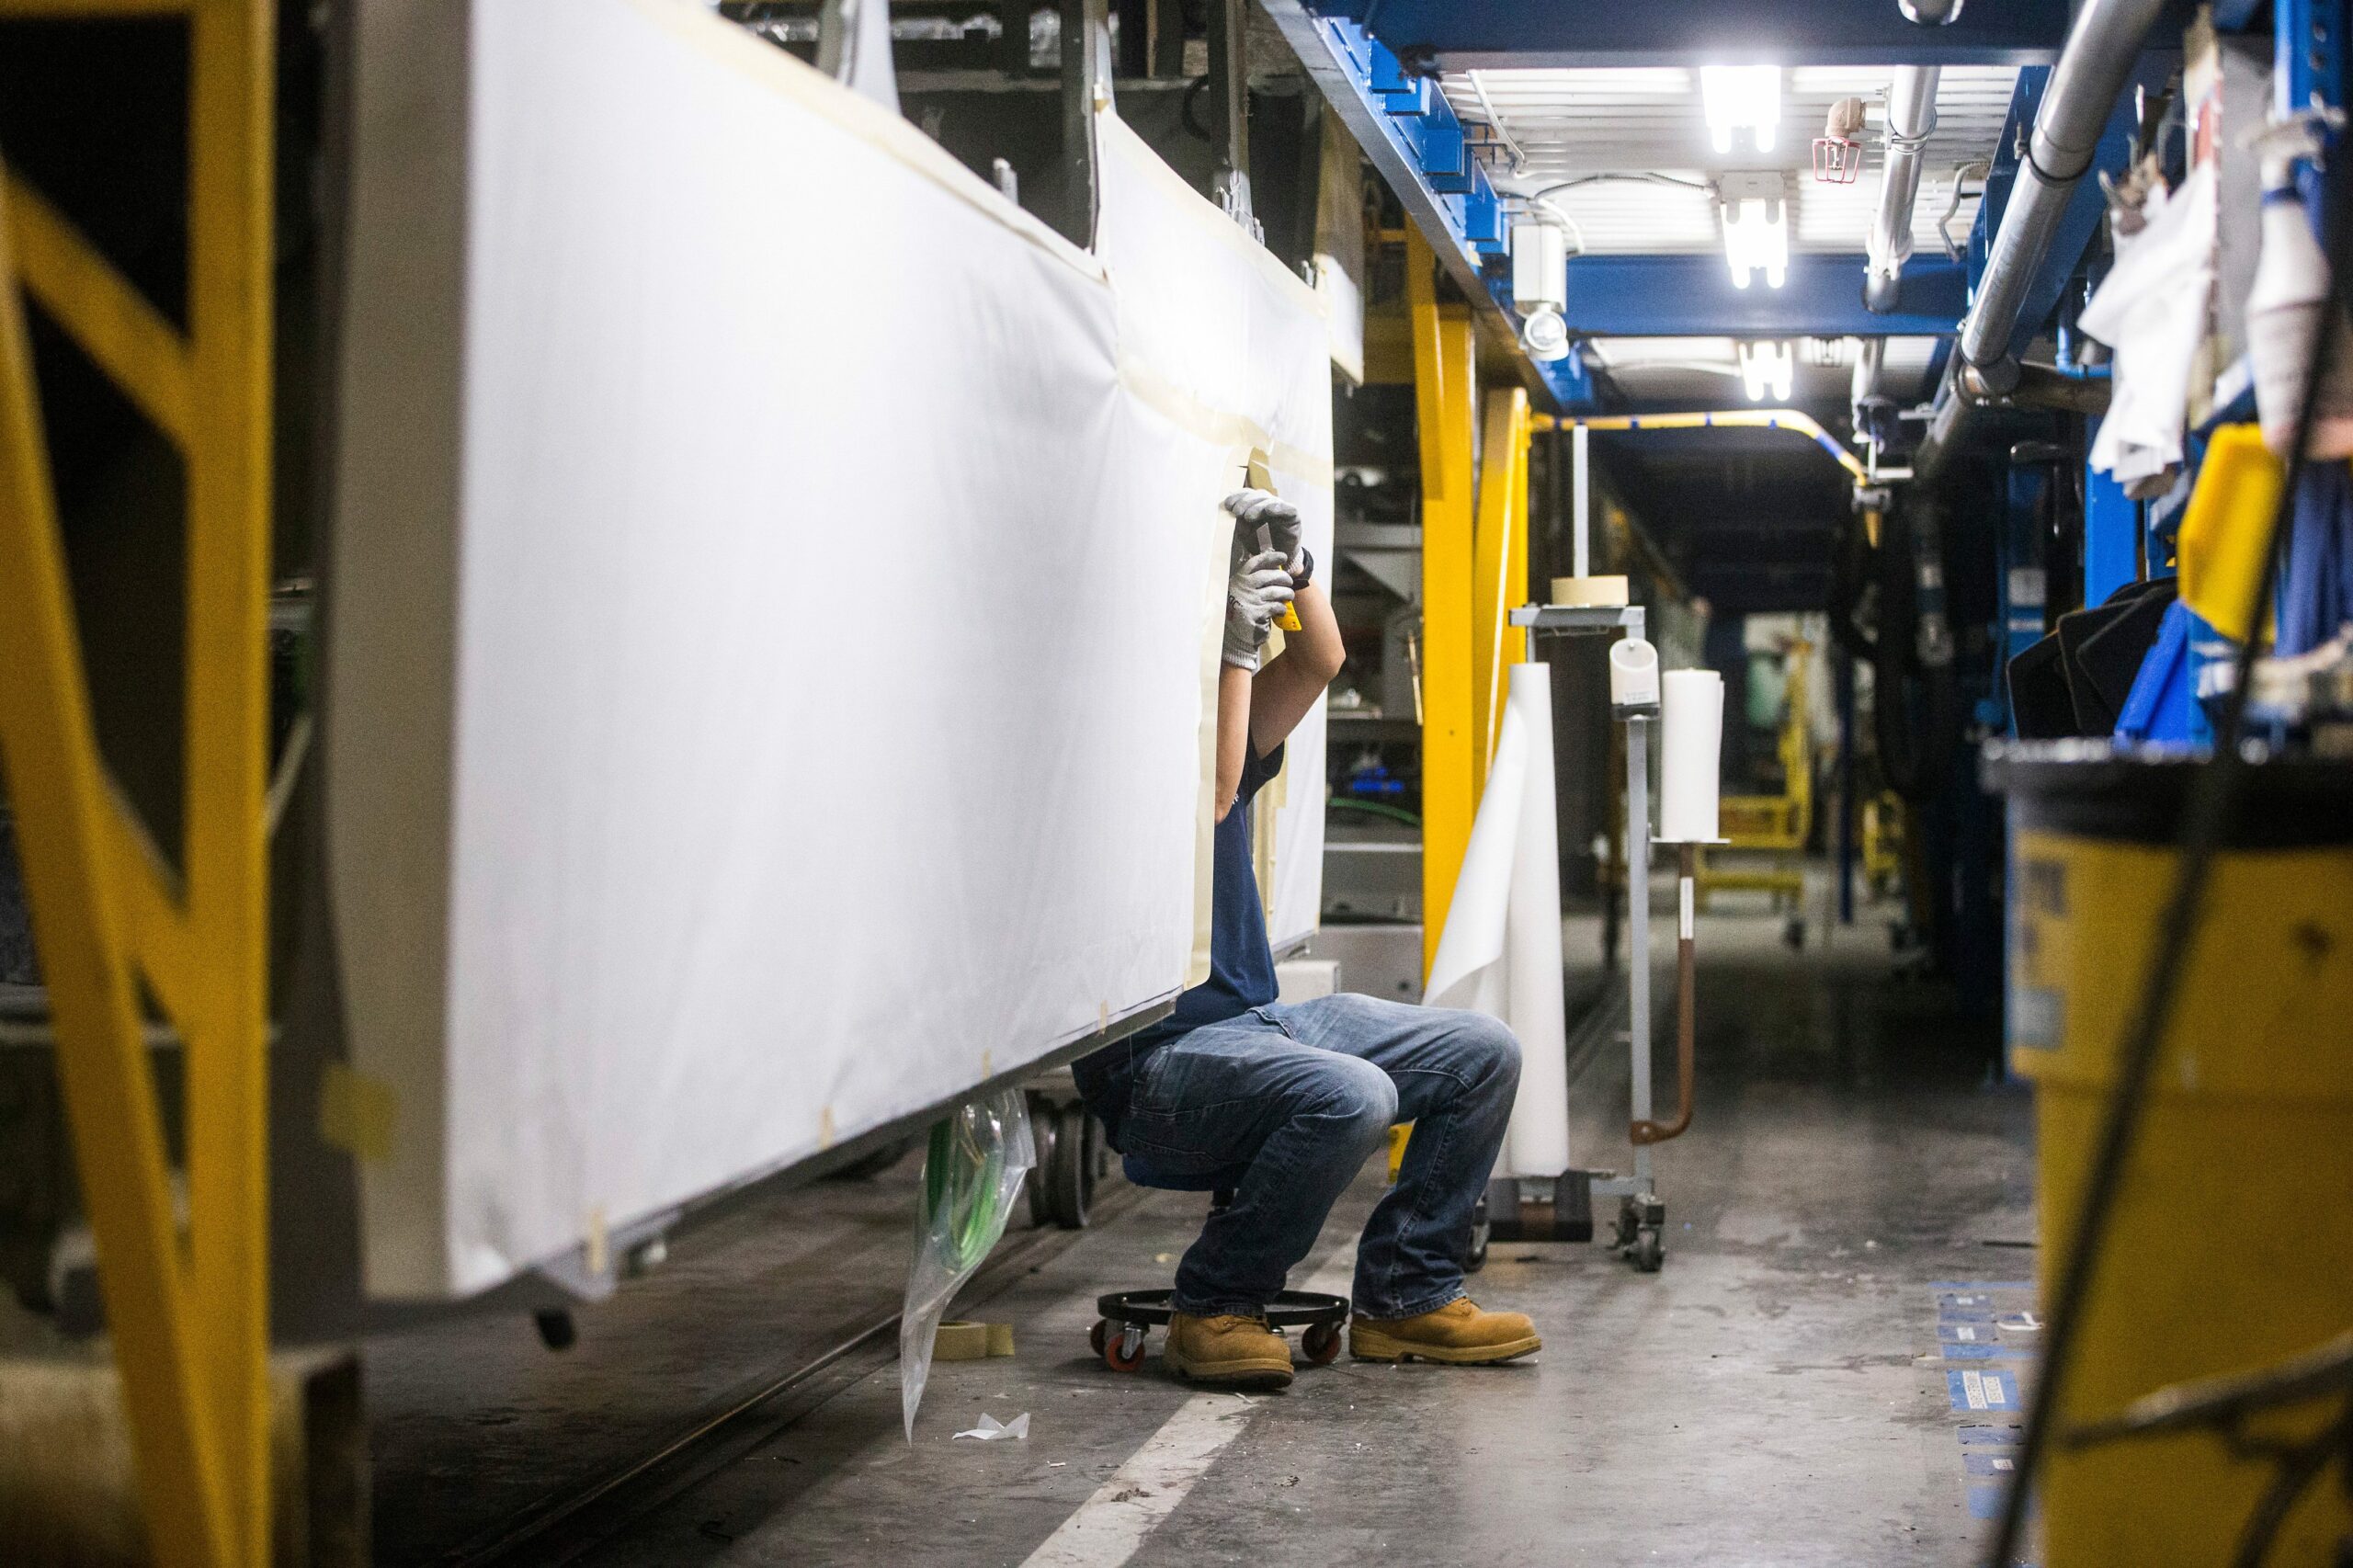 In electric bus maker New Flyer's production facility, a staff member sits below a bus shell he is working on